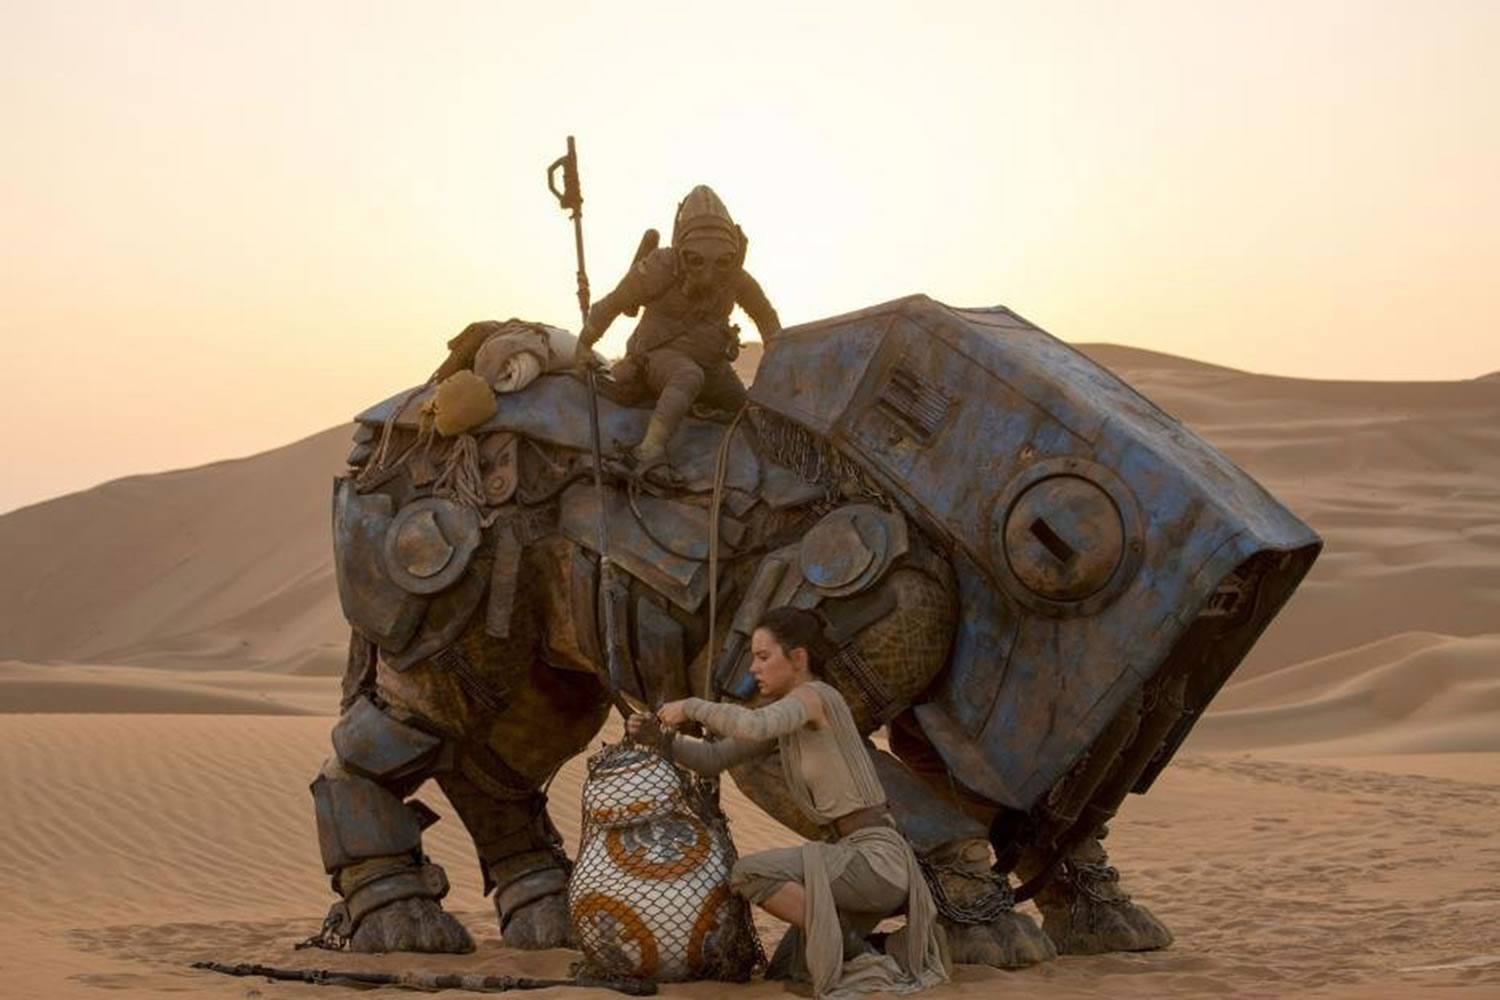 Daisy Ridley in "Star Wars: The Force Awakens." (Photo courtesy Lucasfilm/TNS)